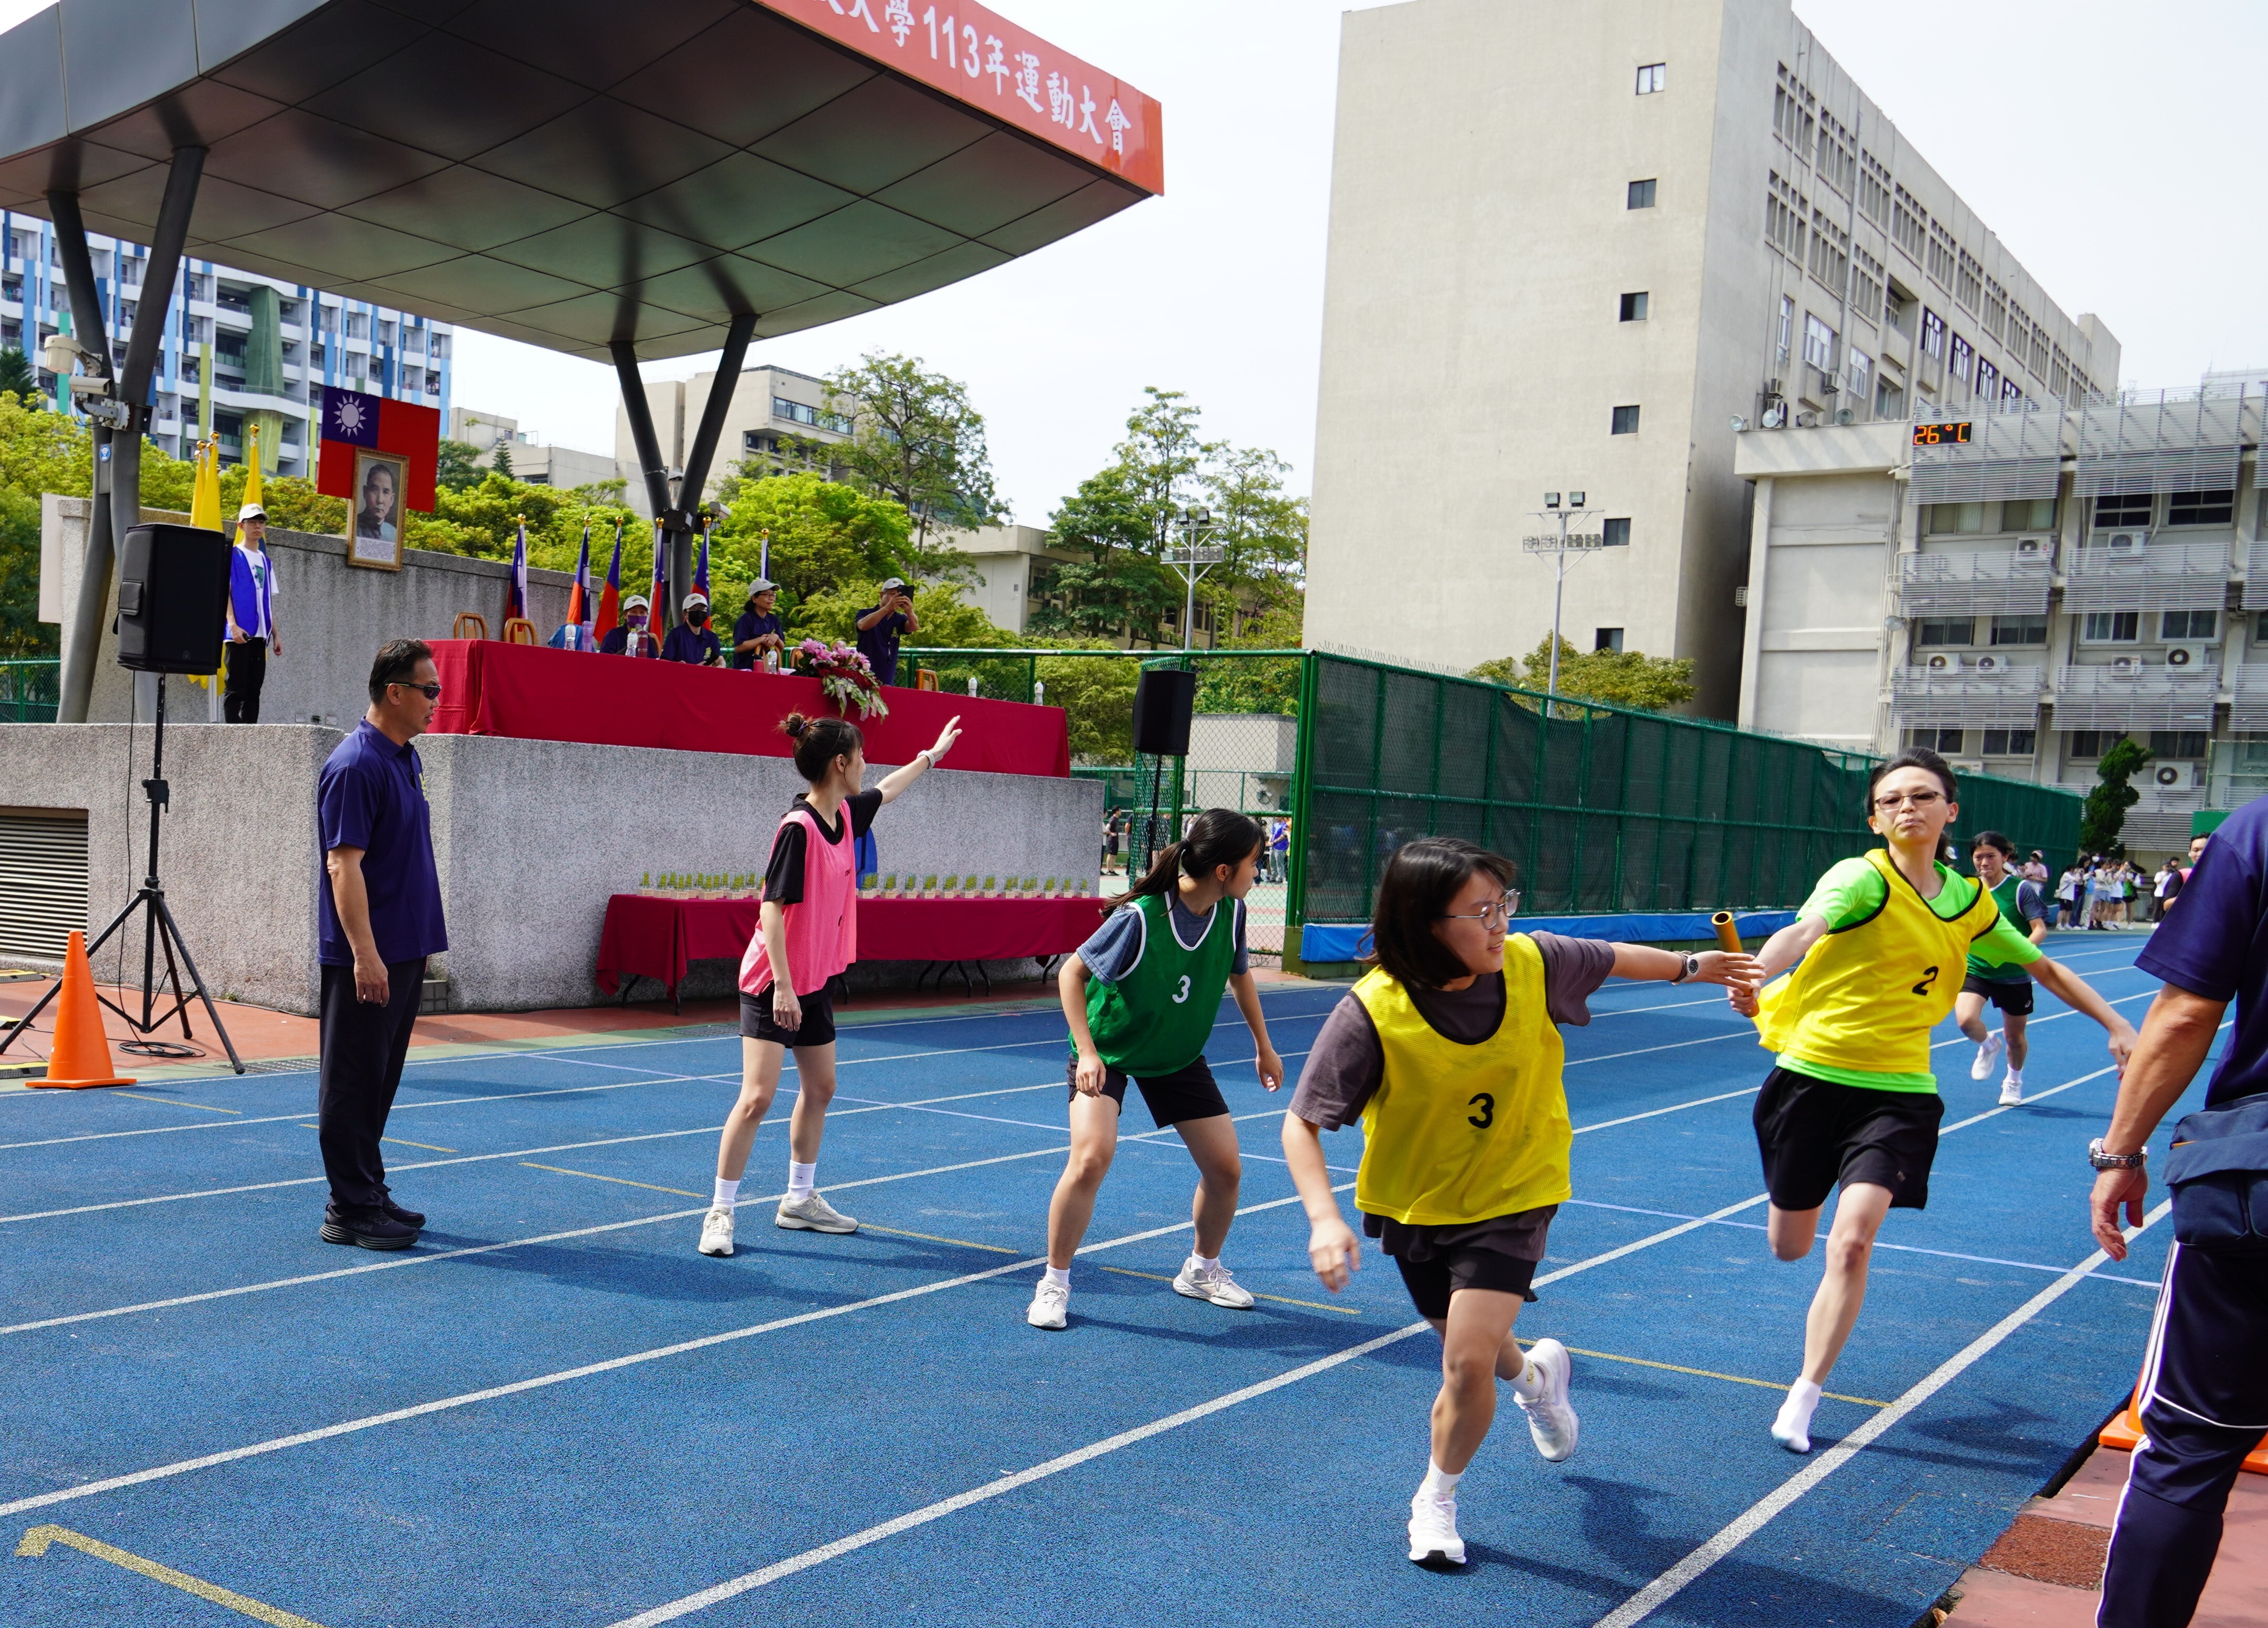 This year, for the first time, students and faculty from National Taiwan University and National Taiwan Normal University, both part of the "National Taiwan University System," were invited to participate in a large team relay race to compete with each other and strengthen the spirit of friendship among the three institutions.